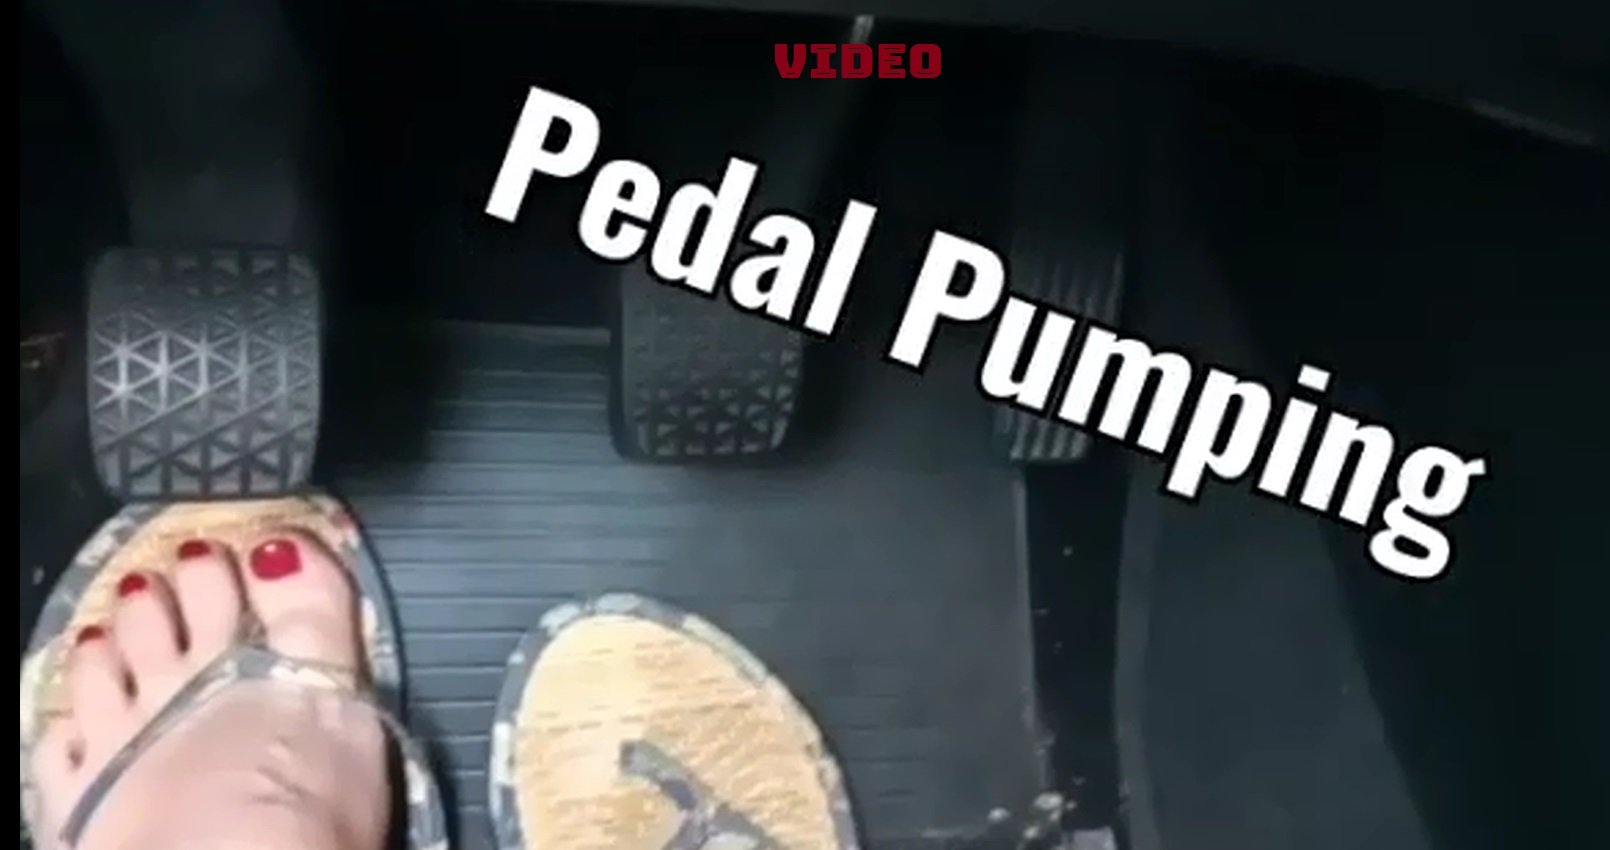 Pedal Pumping video